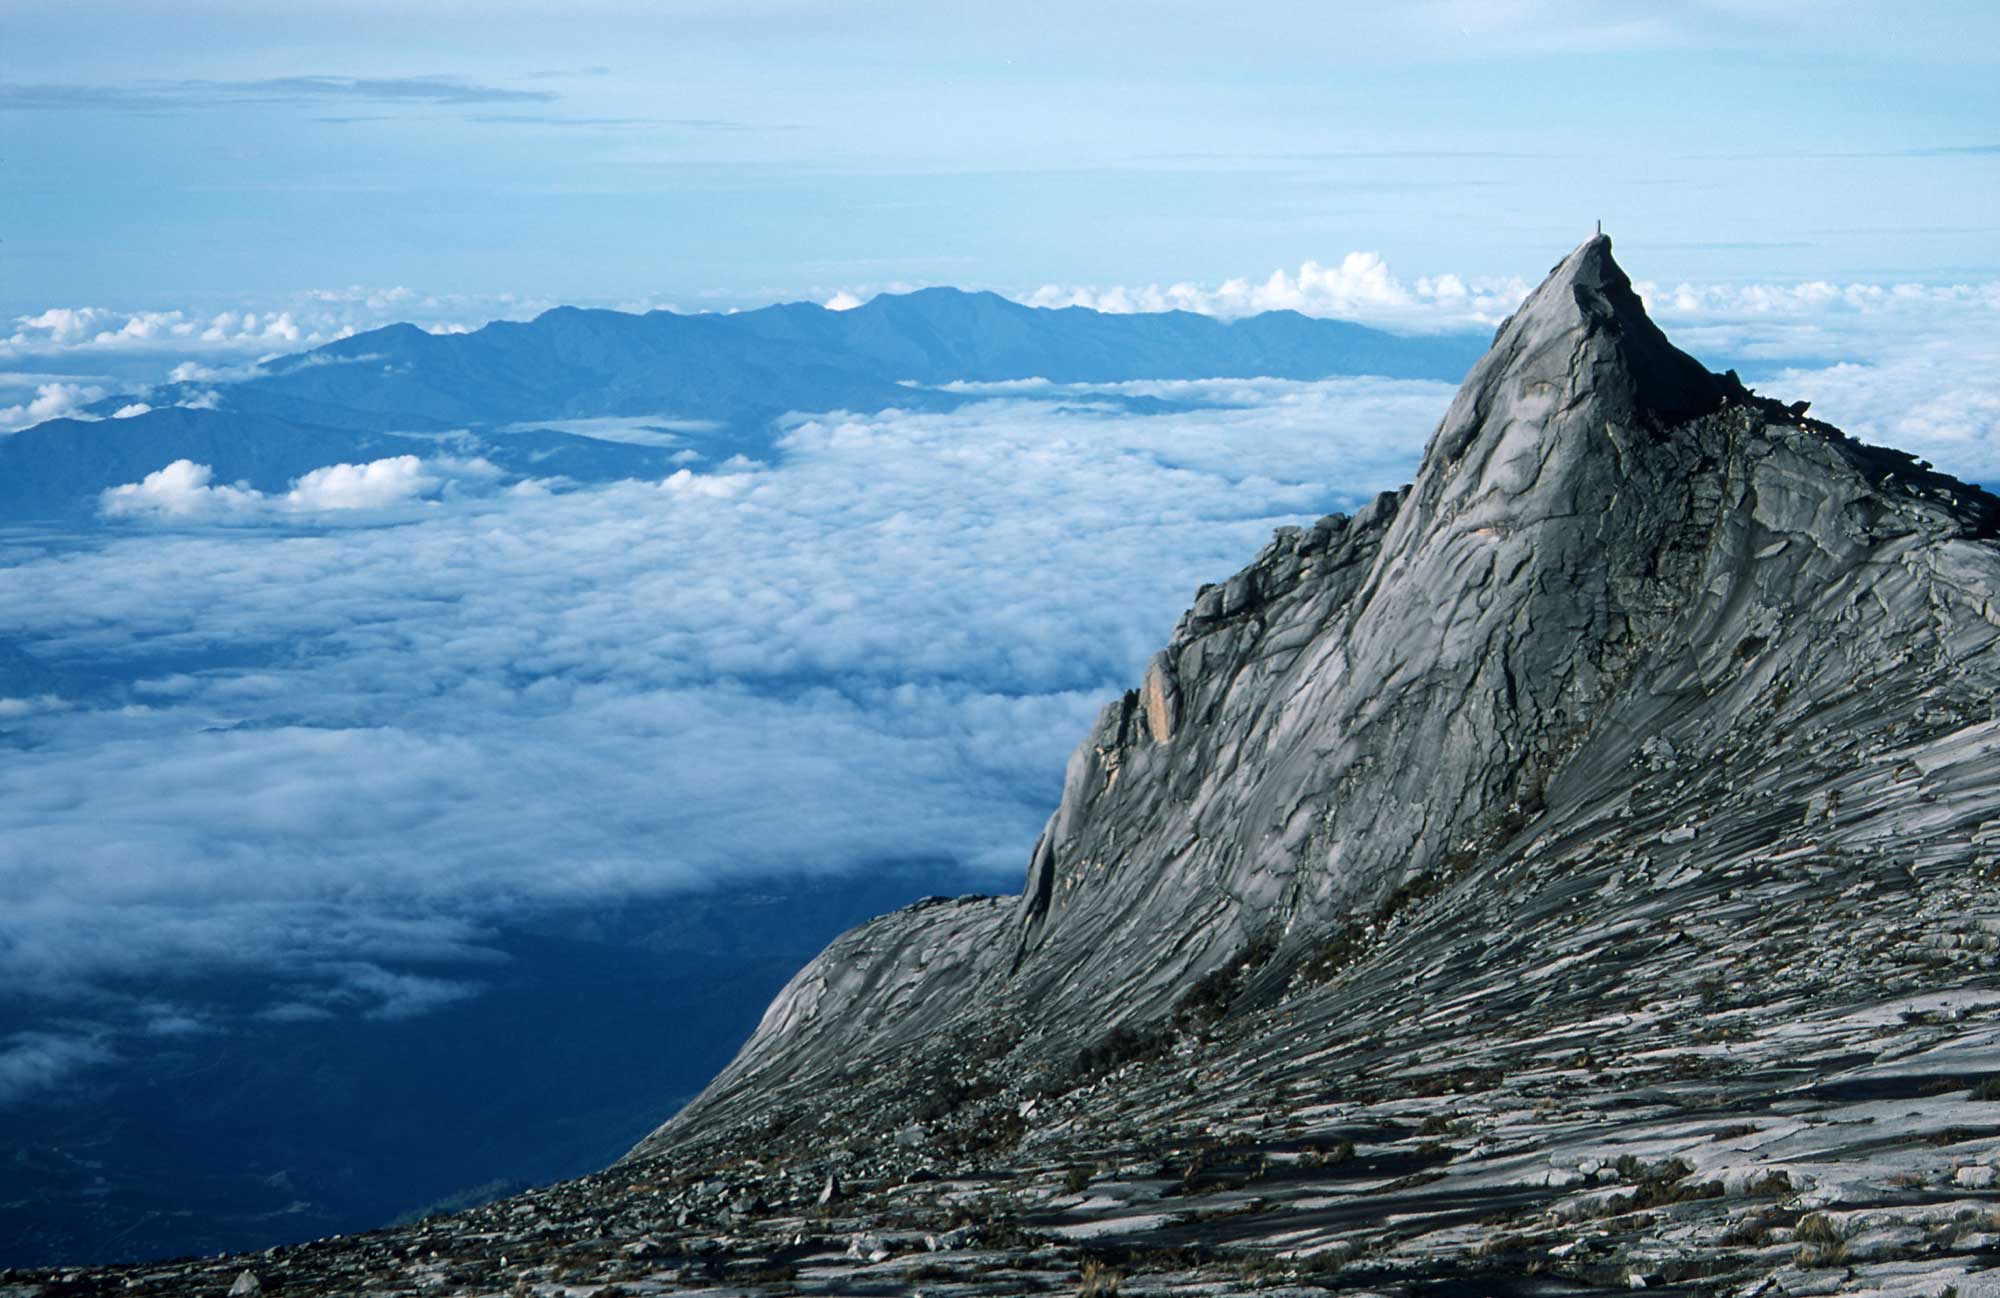 Young Malaysian  Conquers Mt Kinabalu Just One Month After 